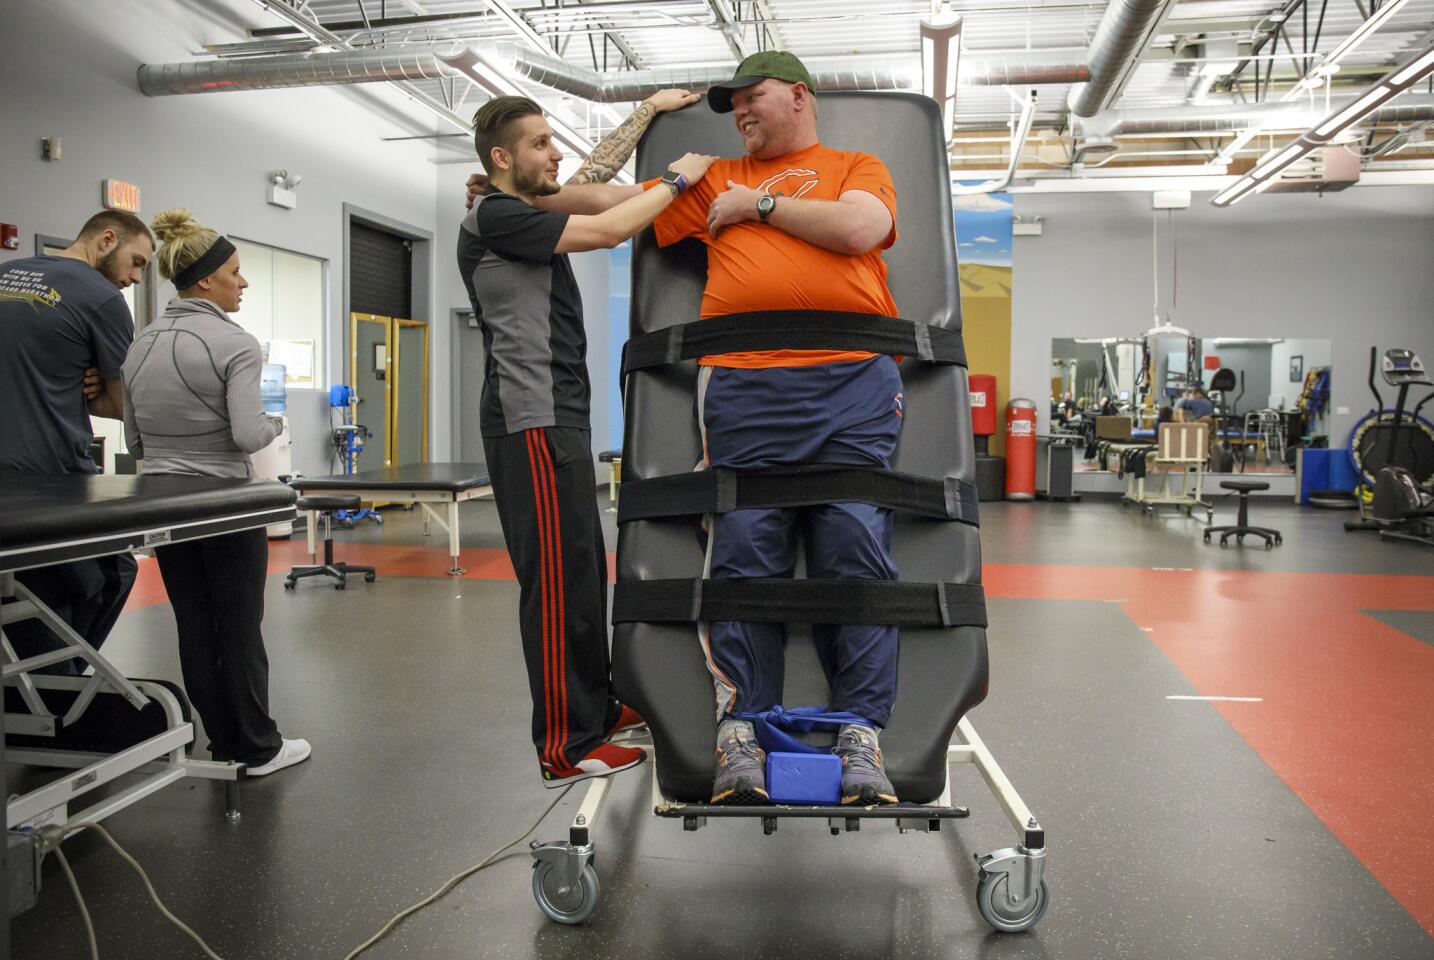 Michael LaPorta stretches with the assistance of neurofitness specialist Creighton Goss during a physical therapy session on March 20, 2017, at the Next Steps rehabilitation center.